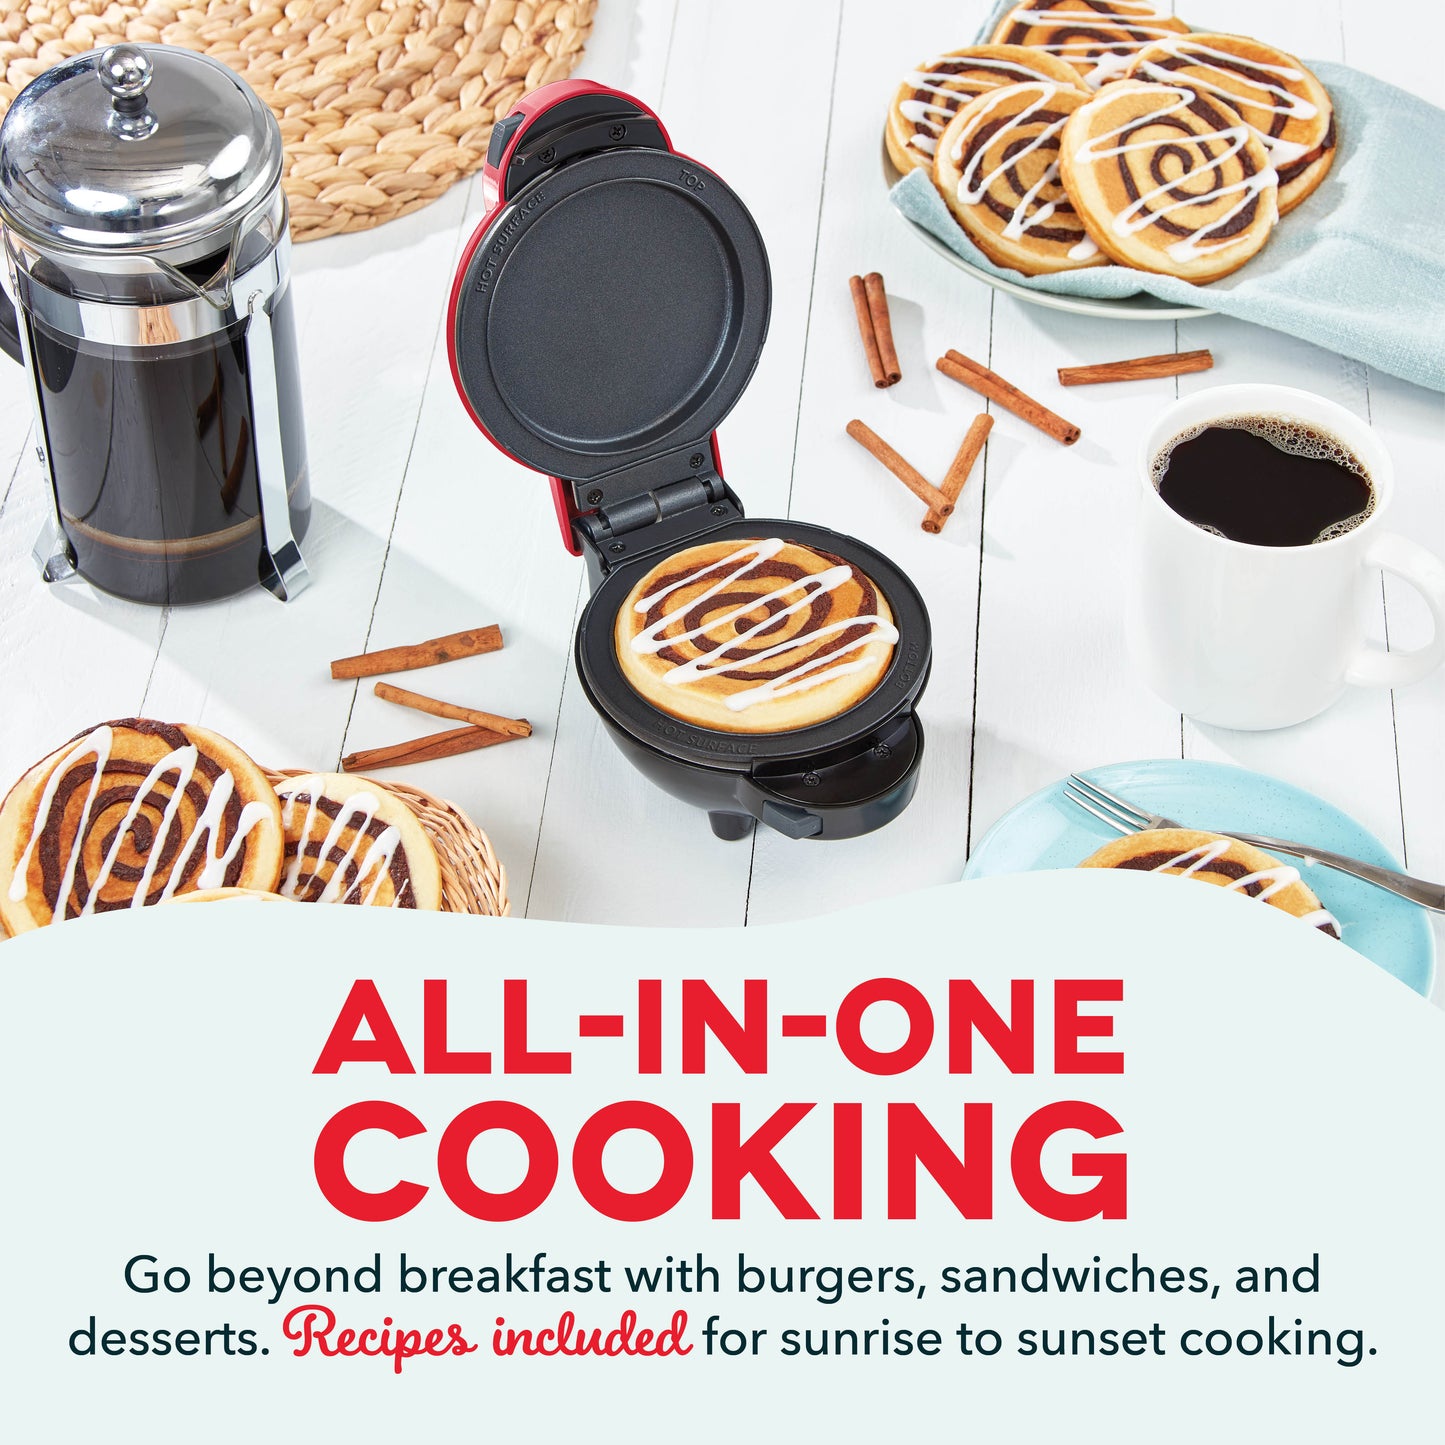 MultiMaker™ Mini System with Removable Plates: Waffle & Griddle mini makers Dash   